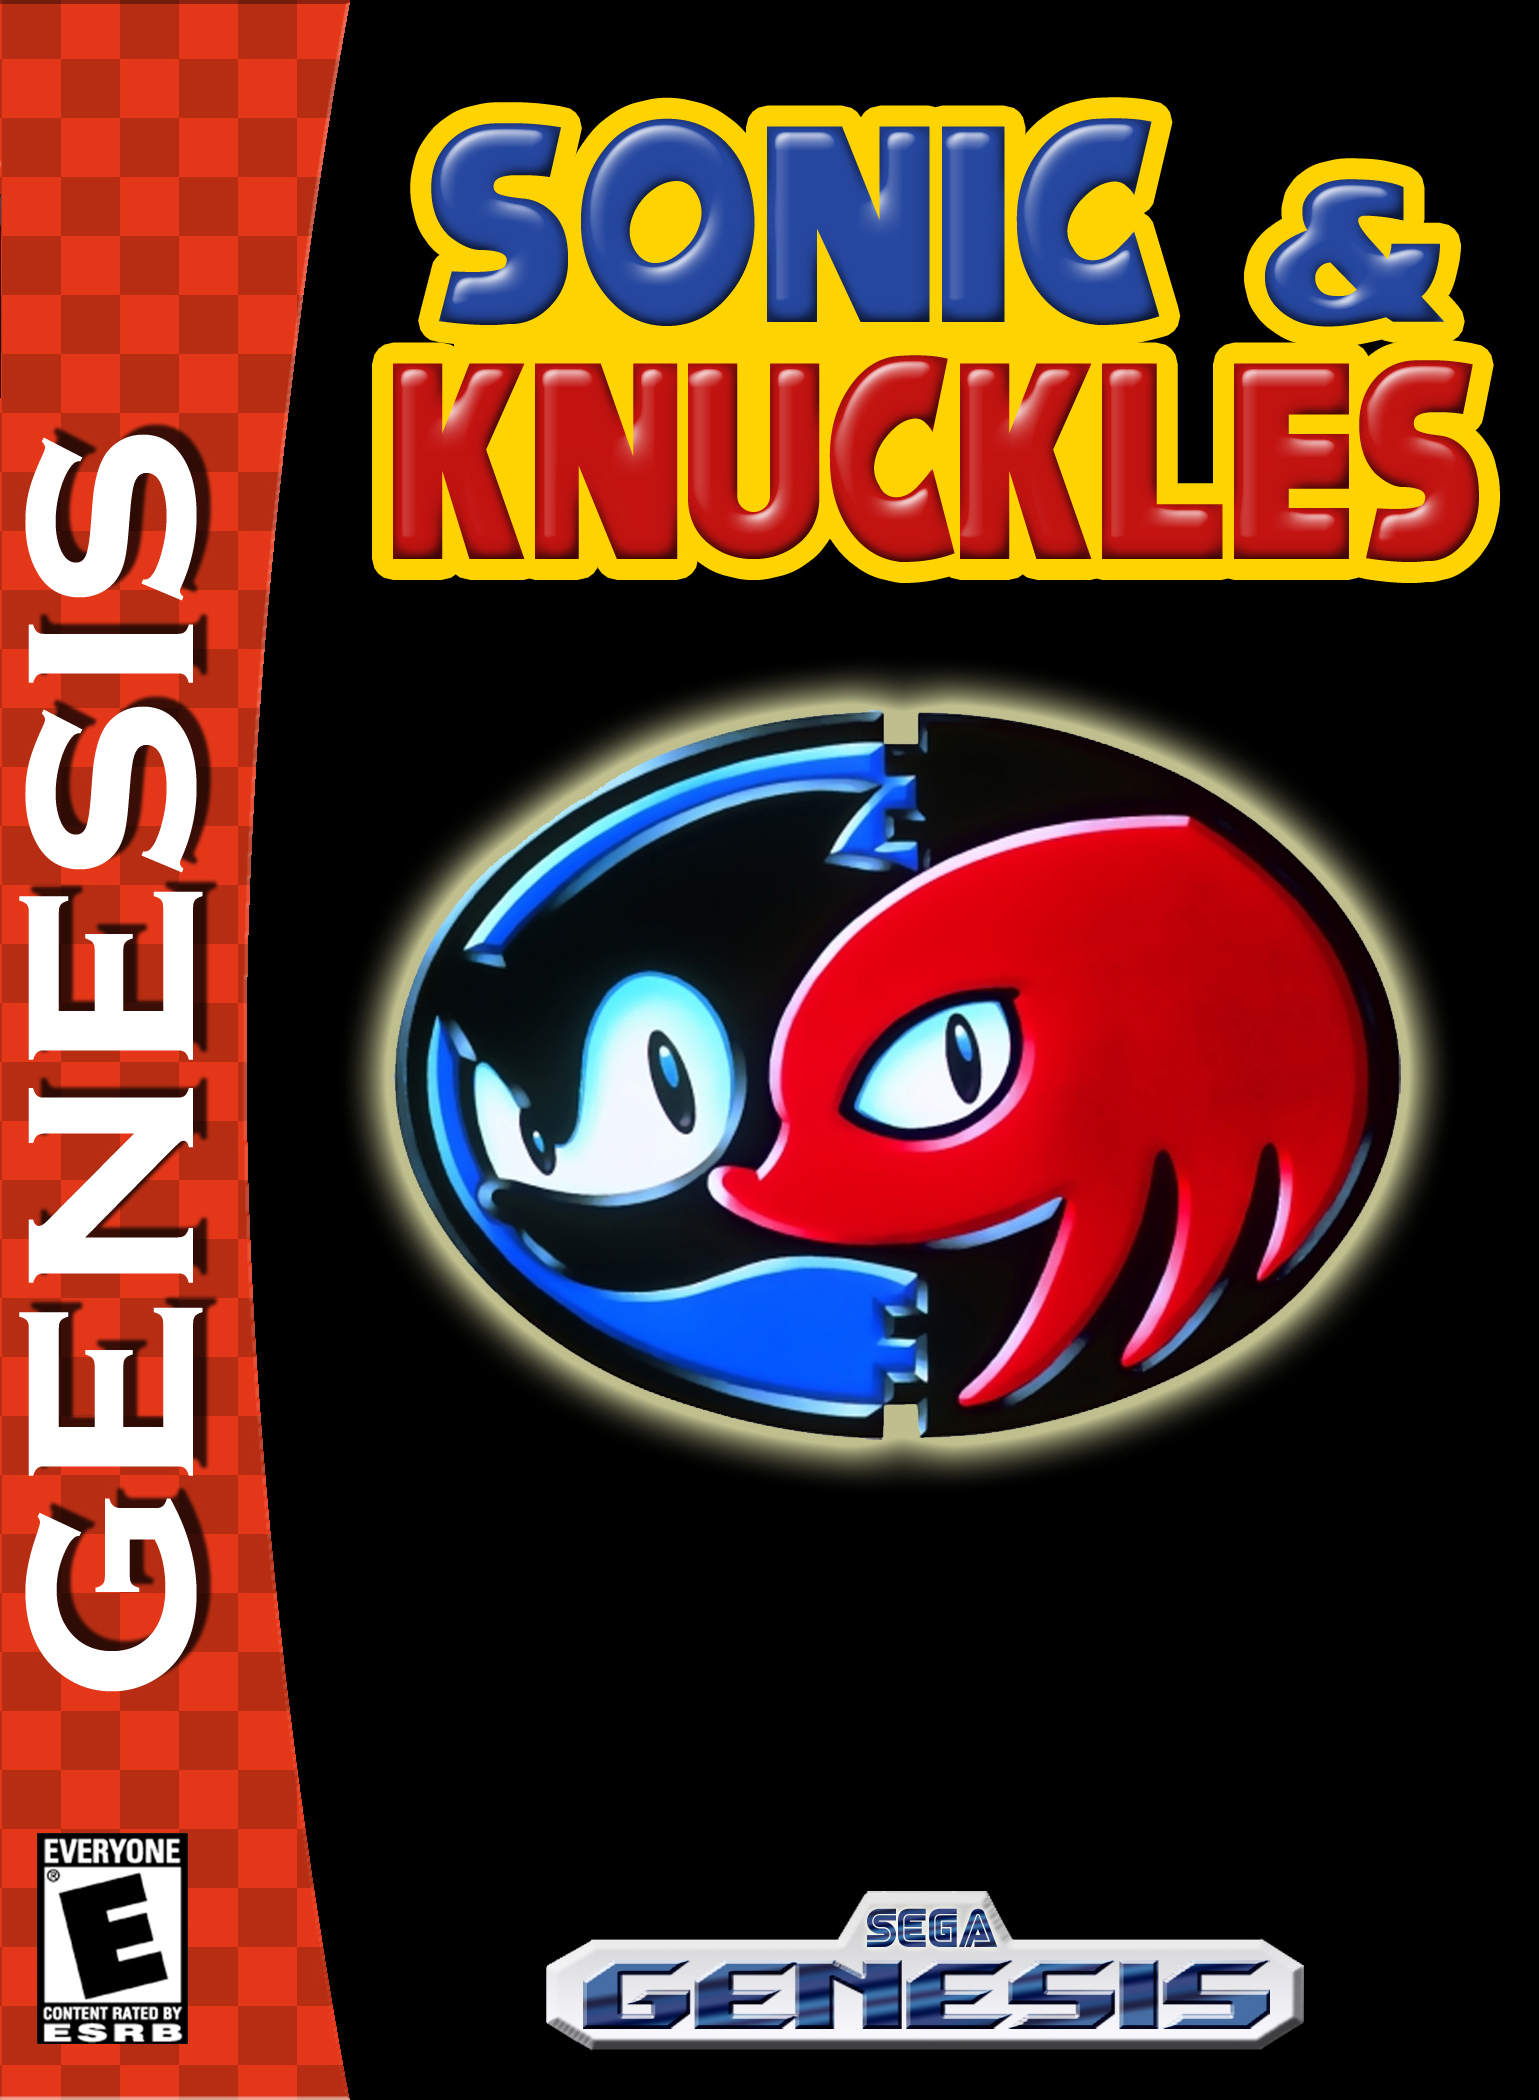 Sonic knuckles air